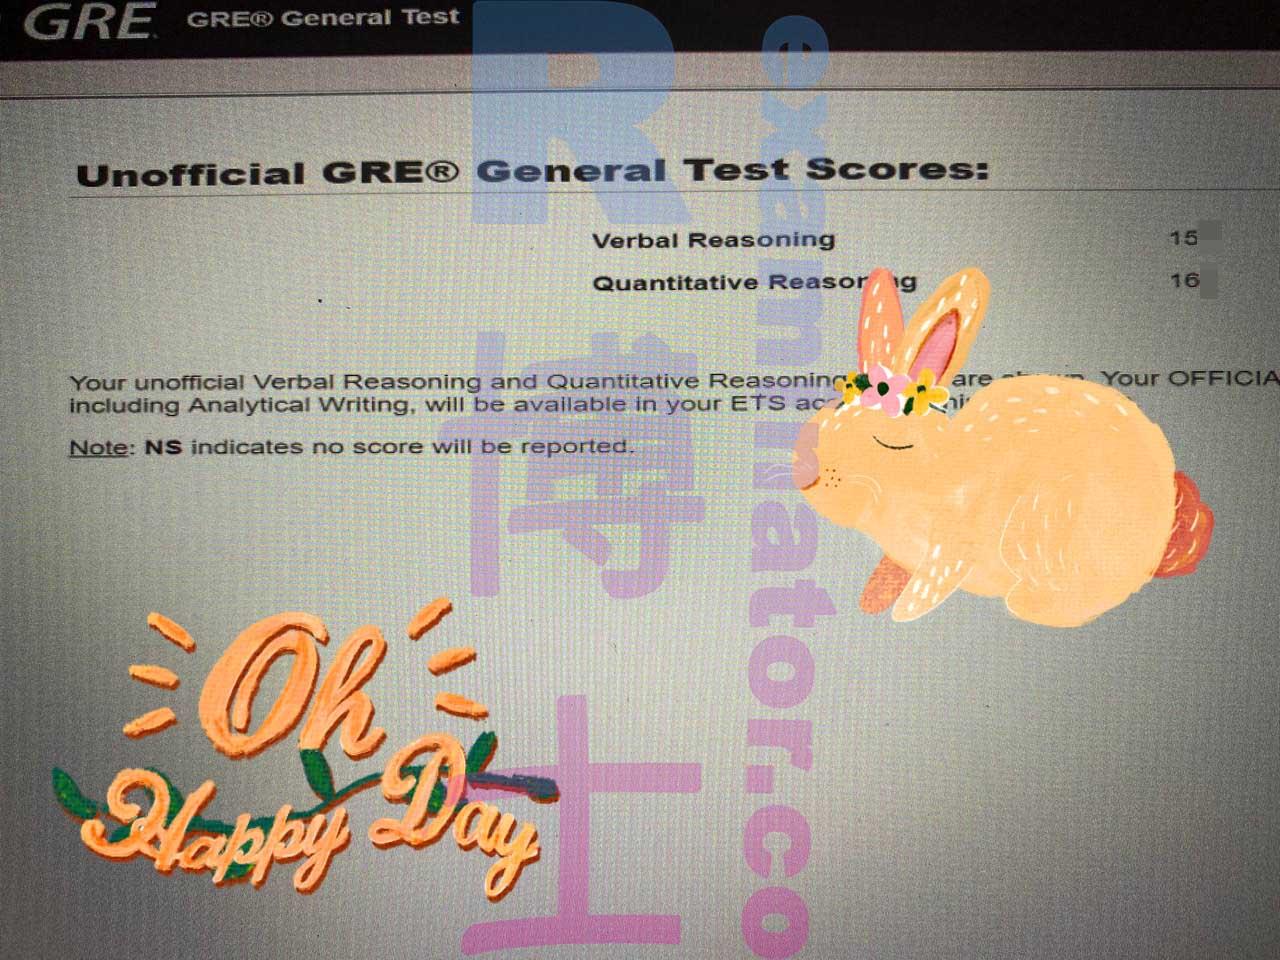 score image for GRE Proxy Testing success story #416